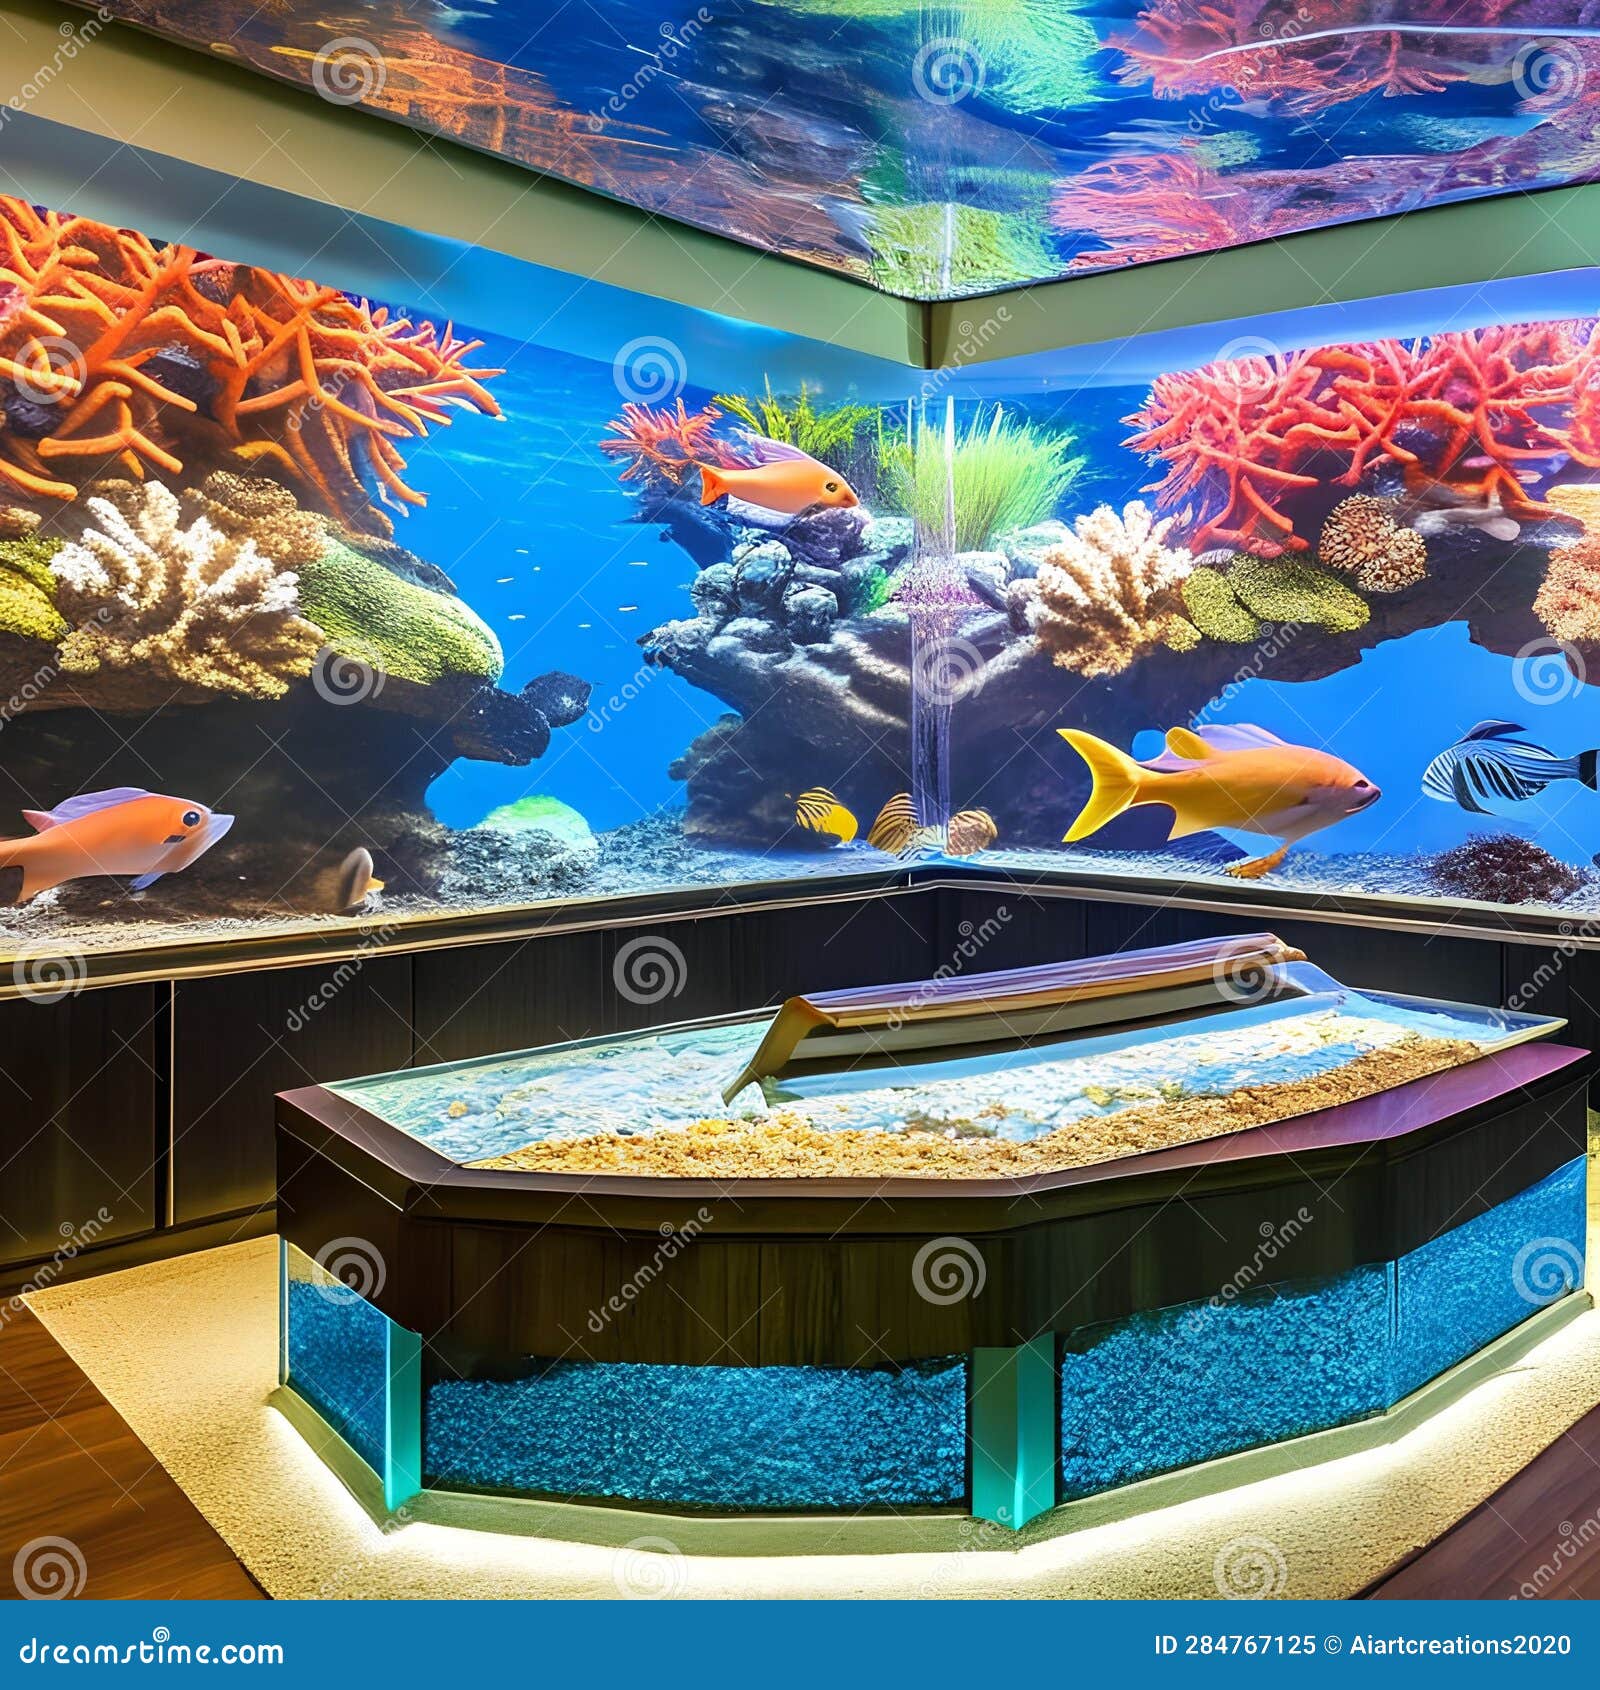 An Underwater-themed Aquarium Room with Floor-to-ceiling Fish